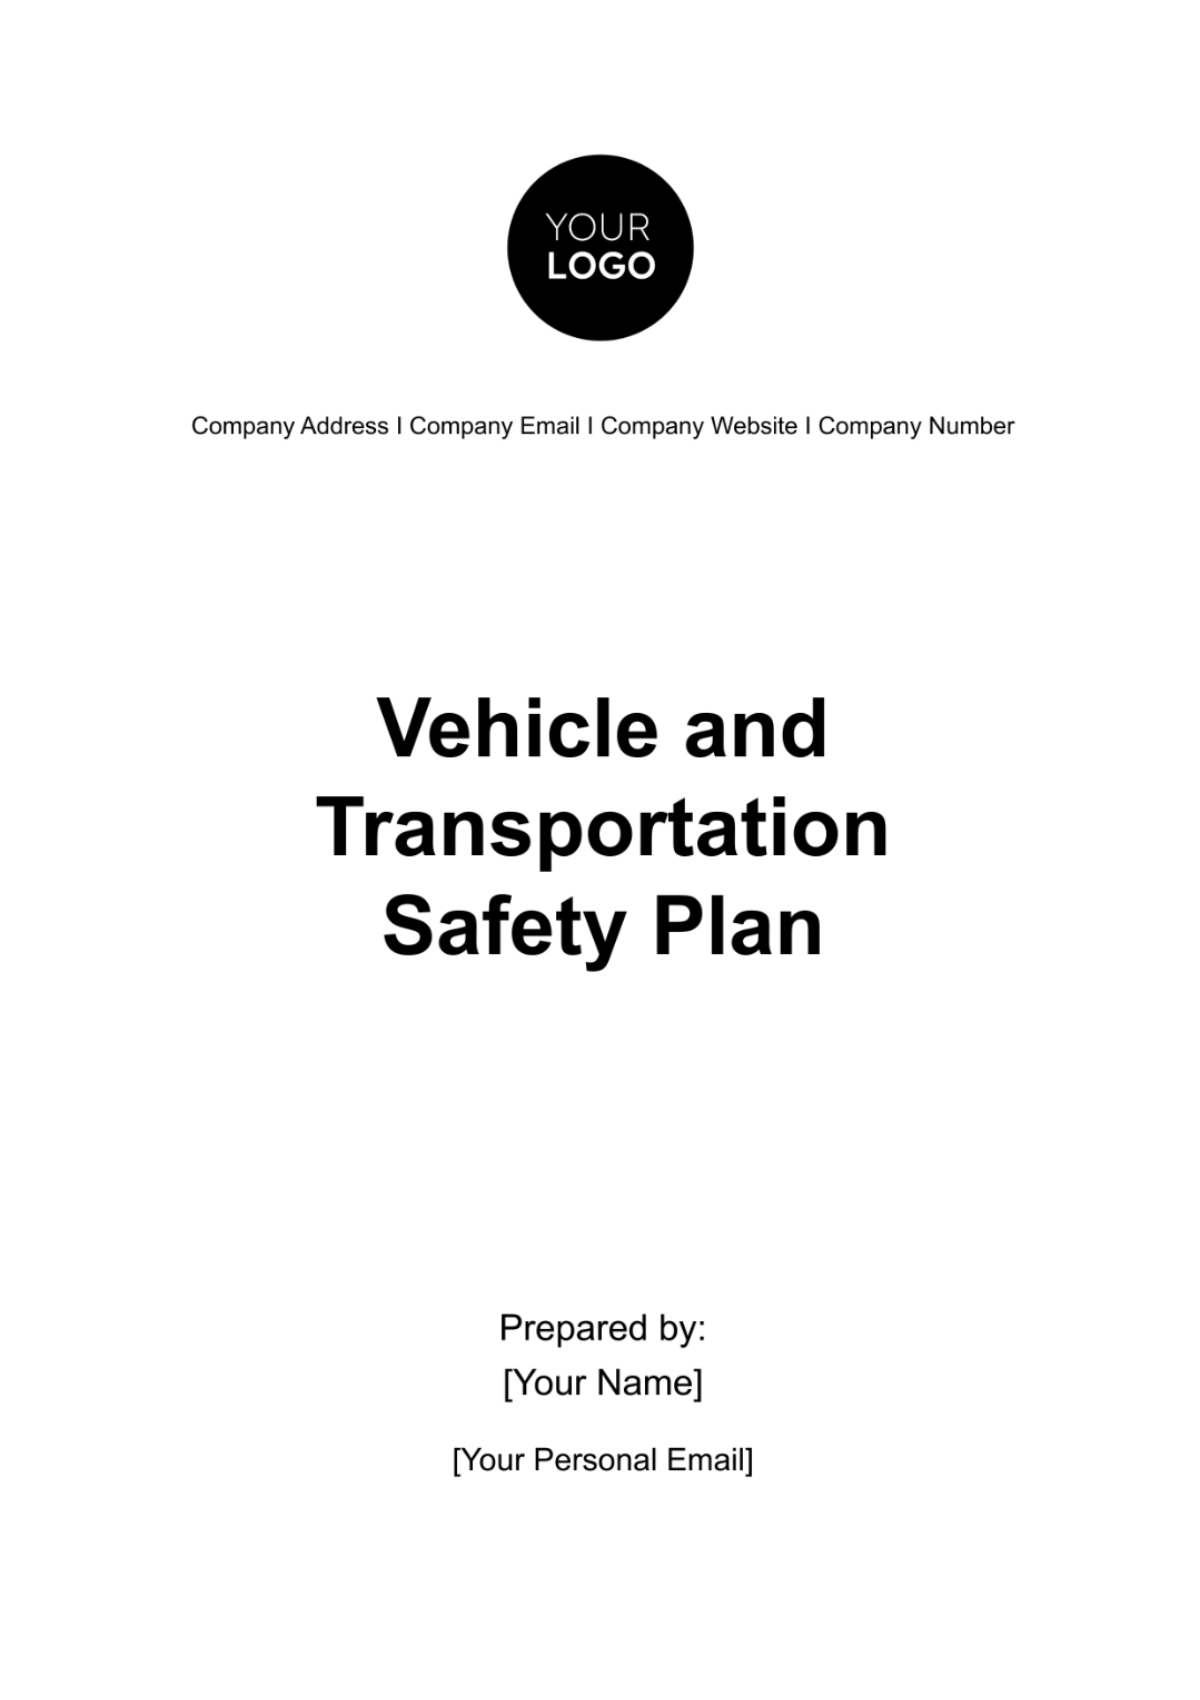 Free Vehicle and Transportation Safety Plan HR Template